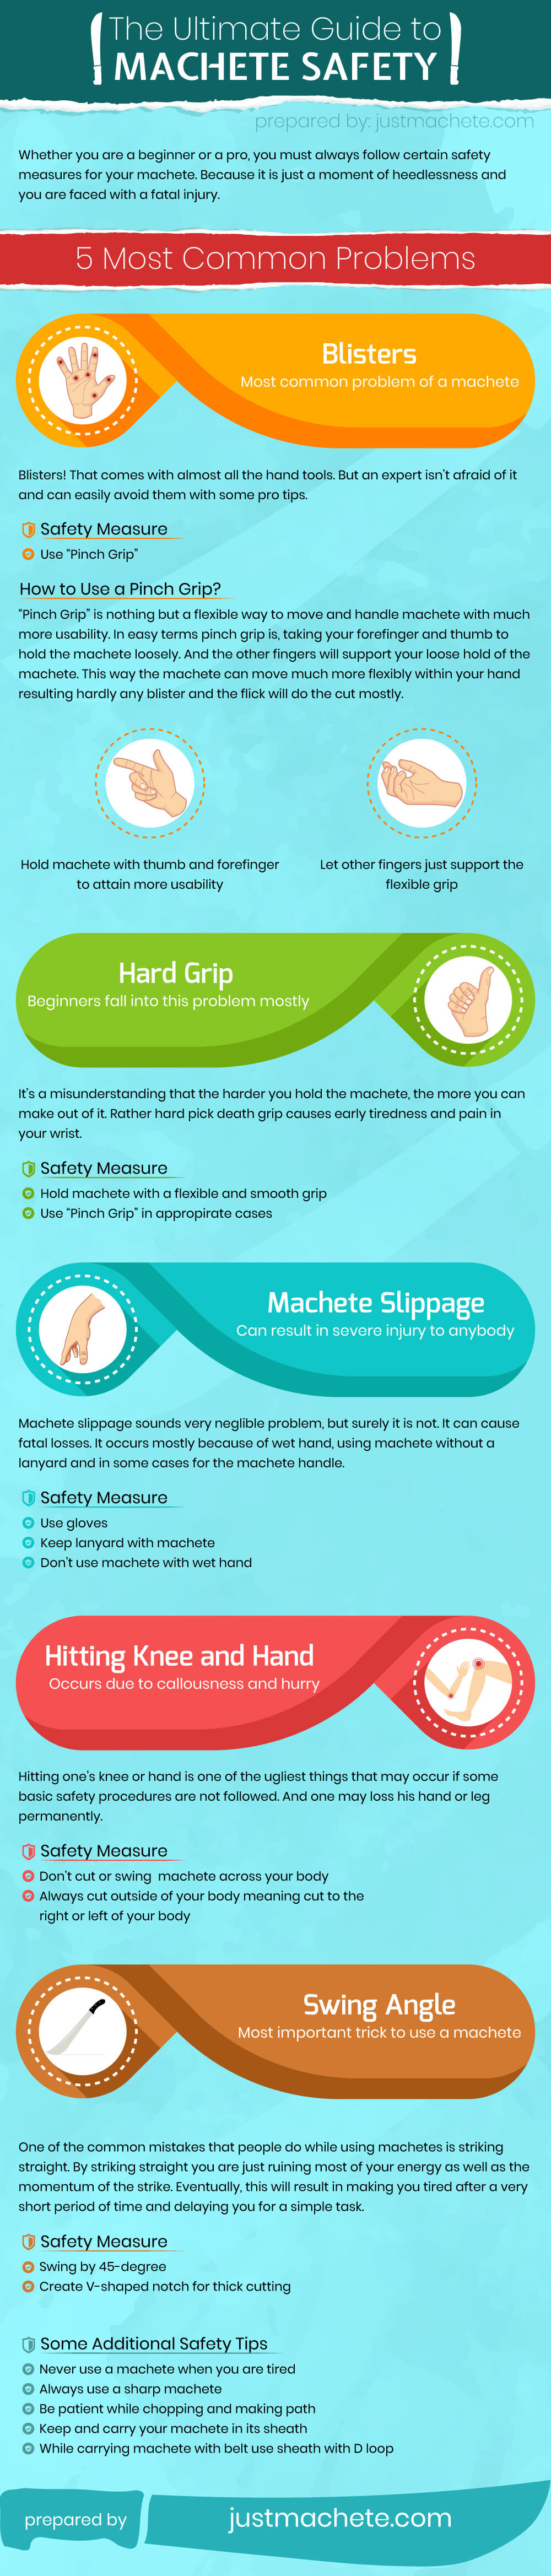 The Ultimate Guide to Machete Safety